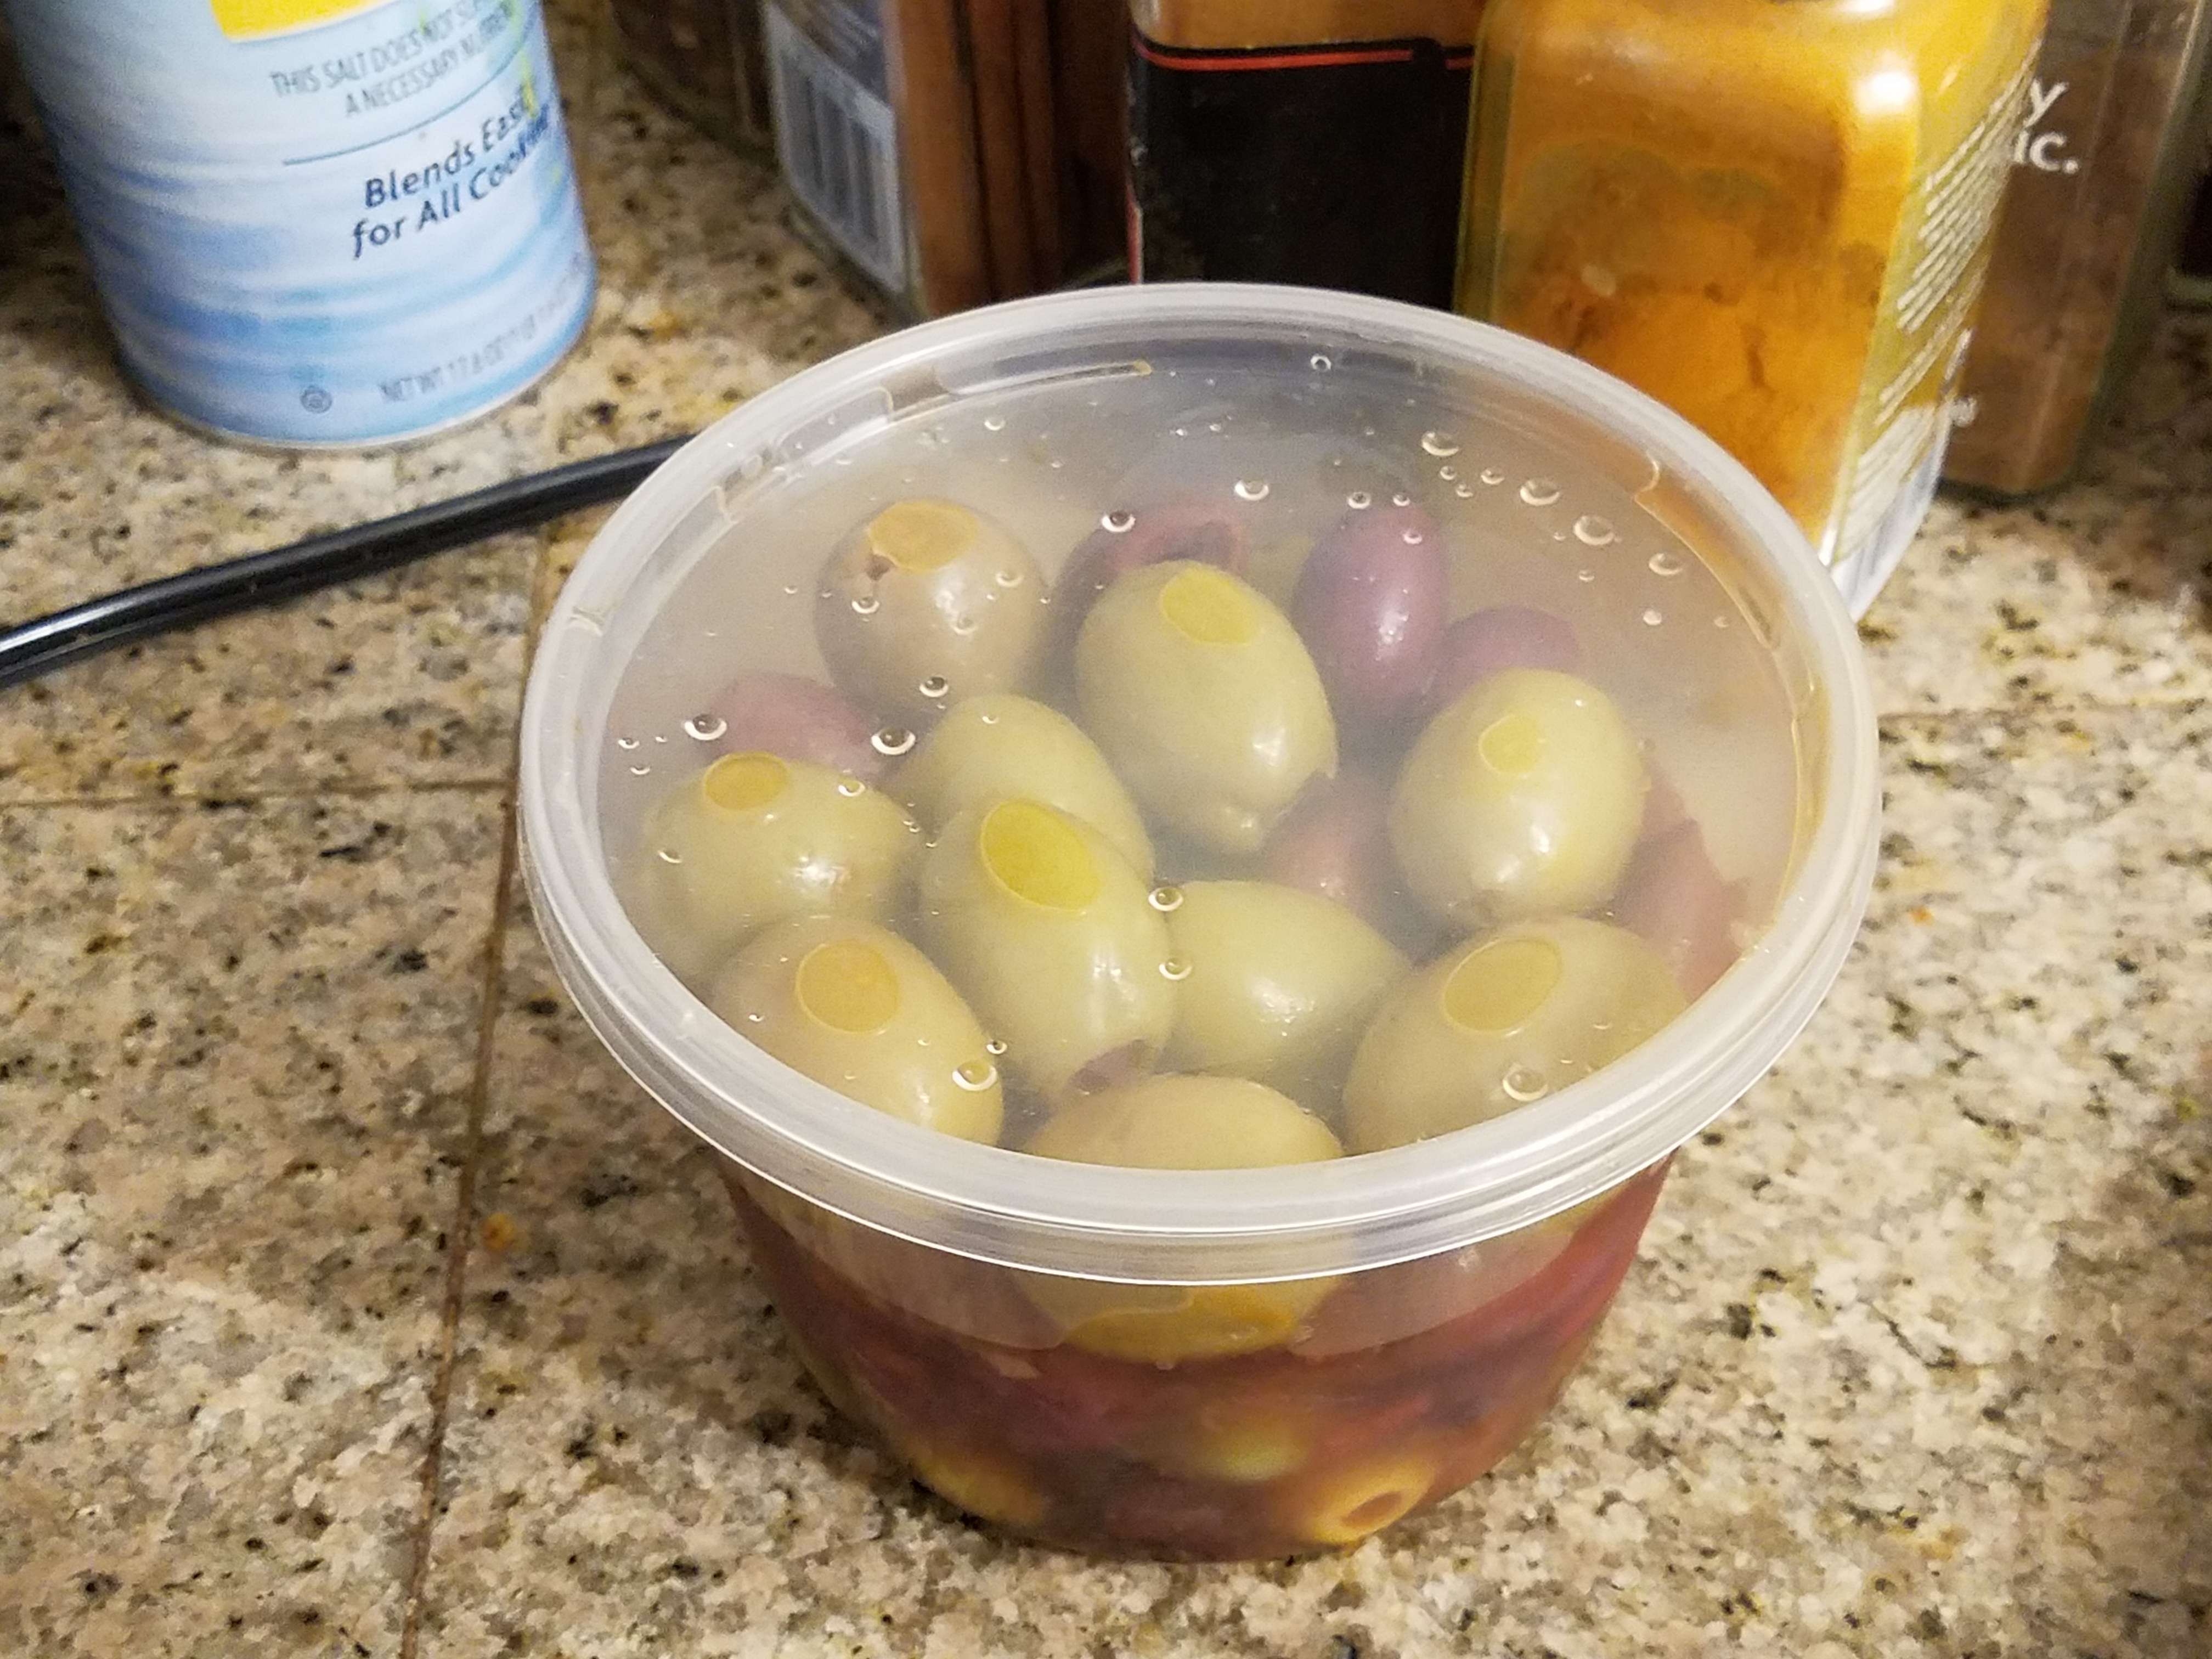 Living well in the 21st century. Limassol, Cyprus. A plastic container with olives and olive oil. 